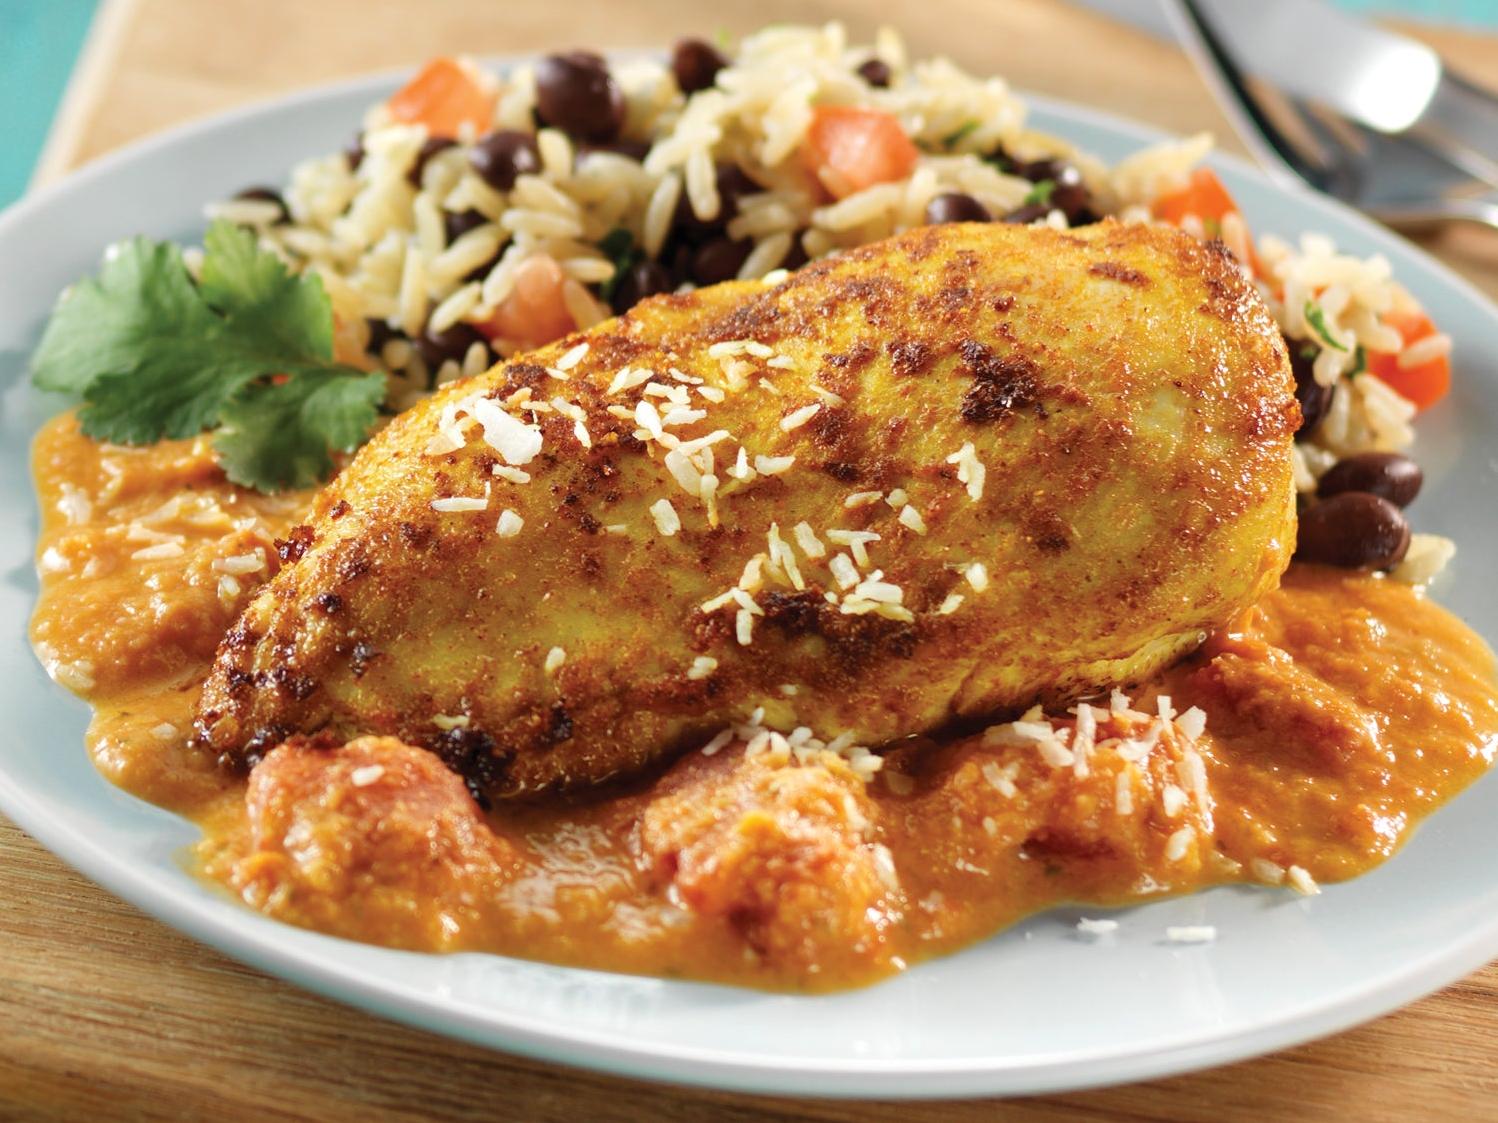  Add some warmth to your weeknight dinner with this flavorful recipe.